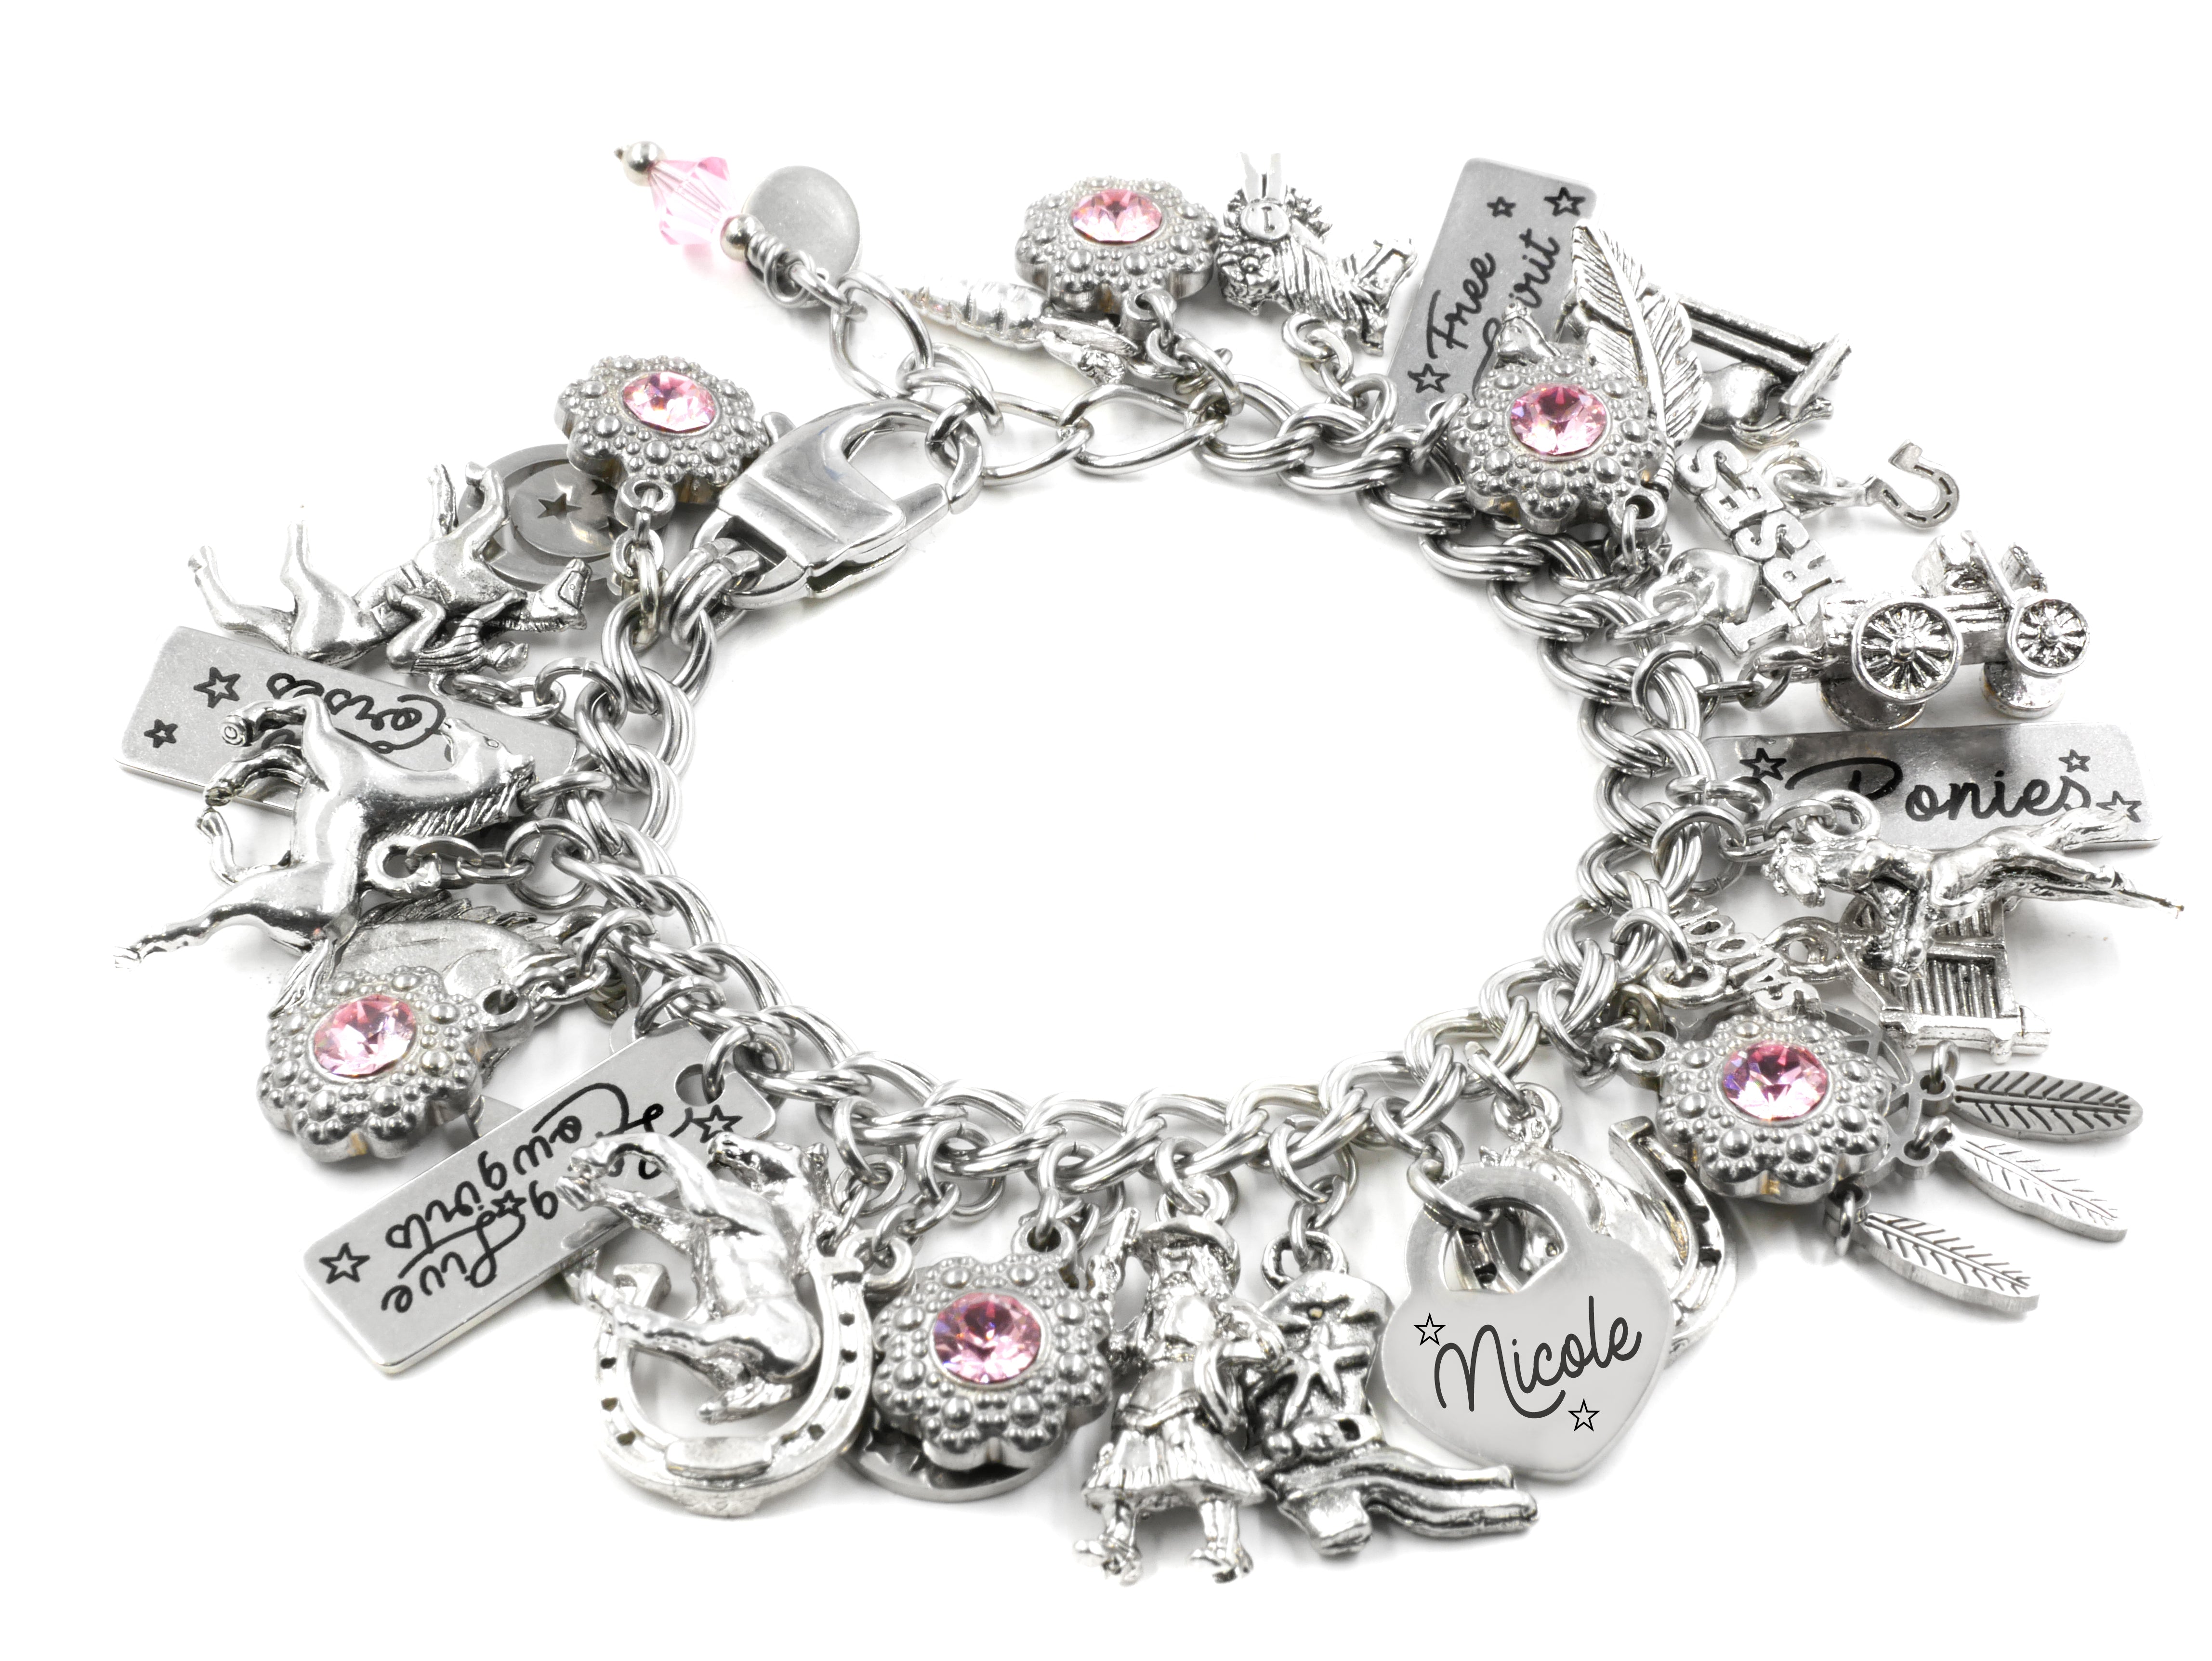 Horses with Crystals + Stainless Steel + Charm Bracelets + 5 Inches to 6 Inches + Charm Bracelets